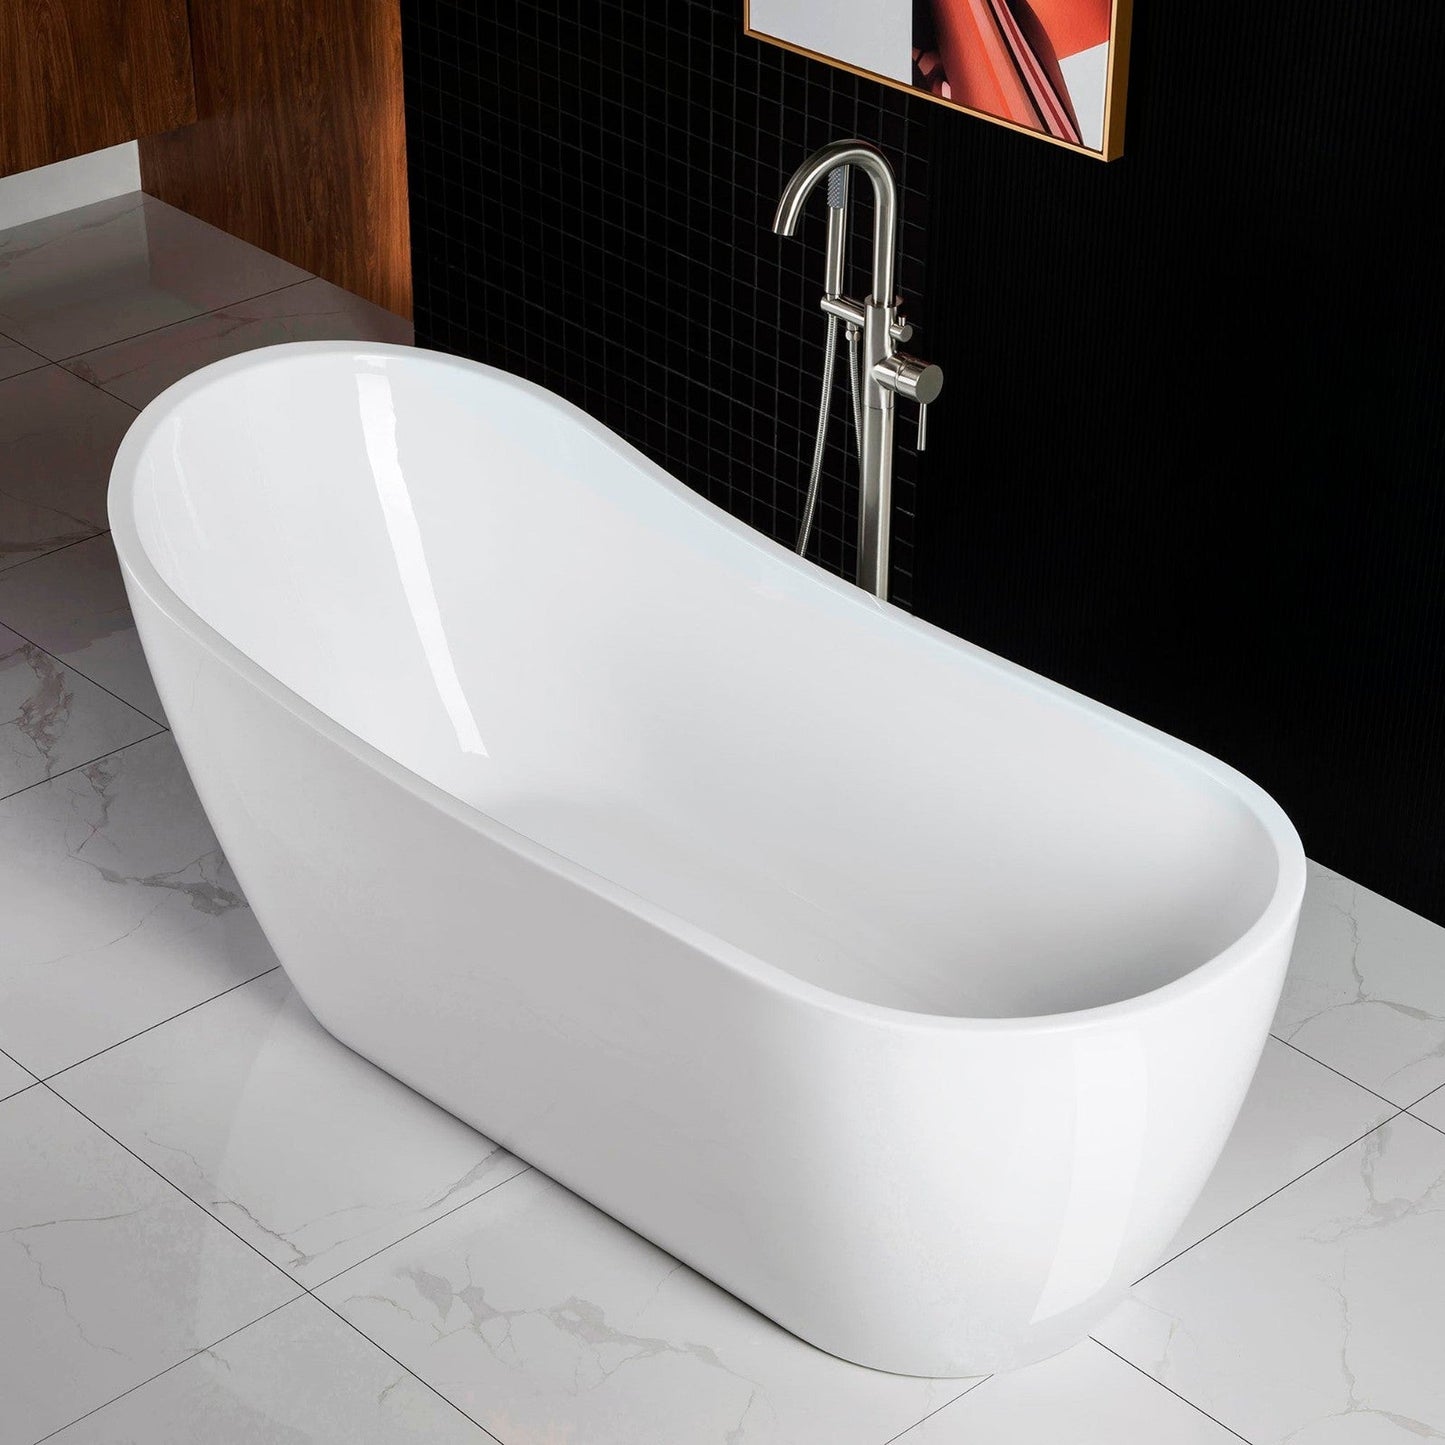 WoodBridge B0001 67" White Acrylic Freestanding Soaking Bathtub With Brushed Nickel Drain, Overflow, F0070BNVT Tub Filler and Caddy Tray